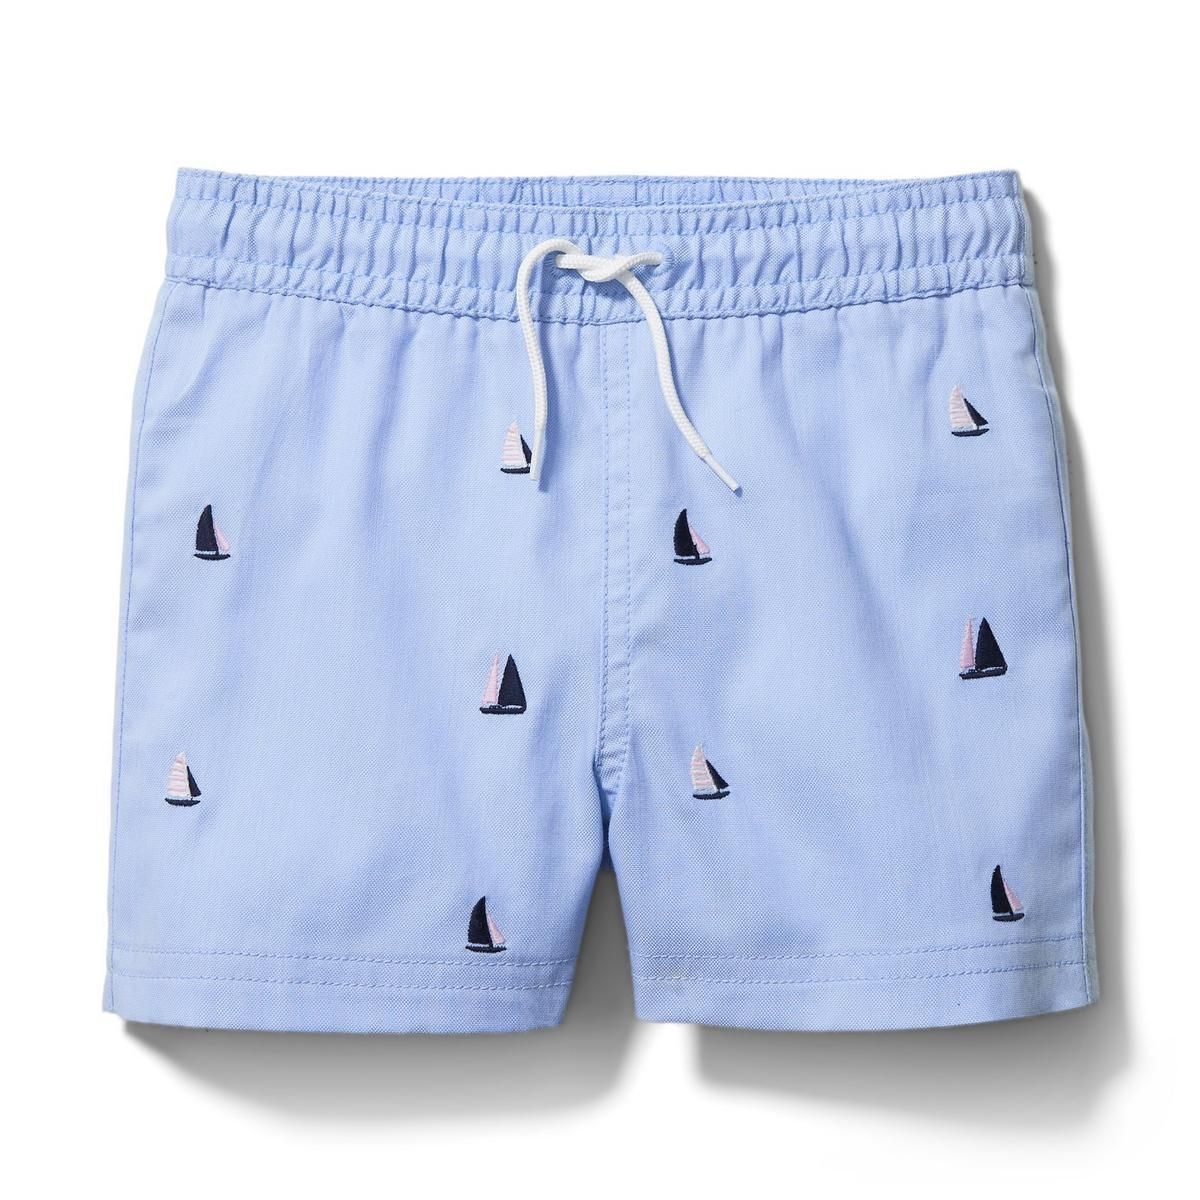 Embroidered Sailboat Swim Trunk | Janie and Jack